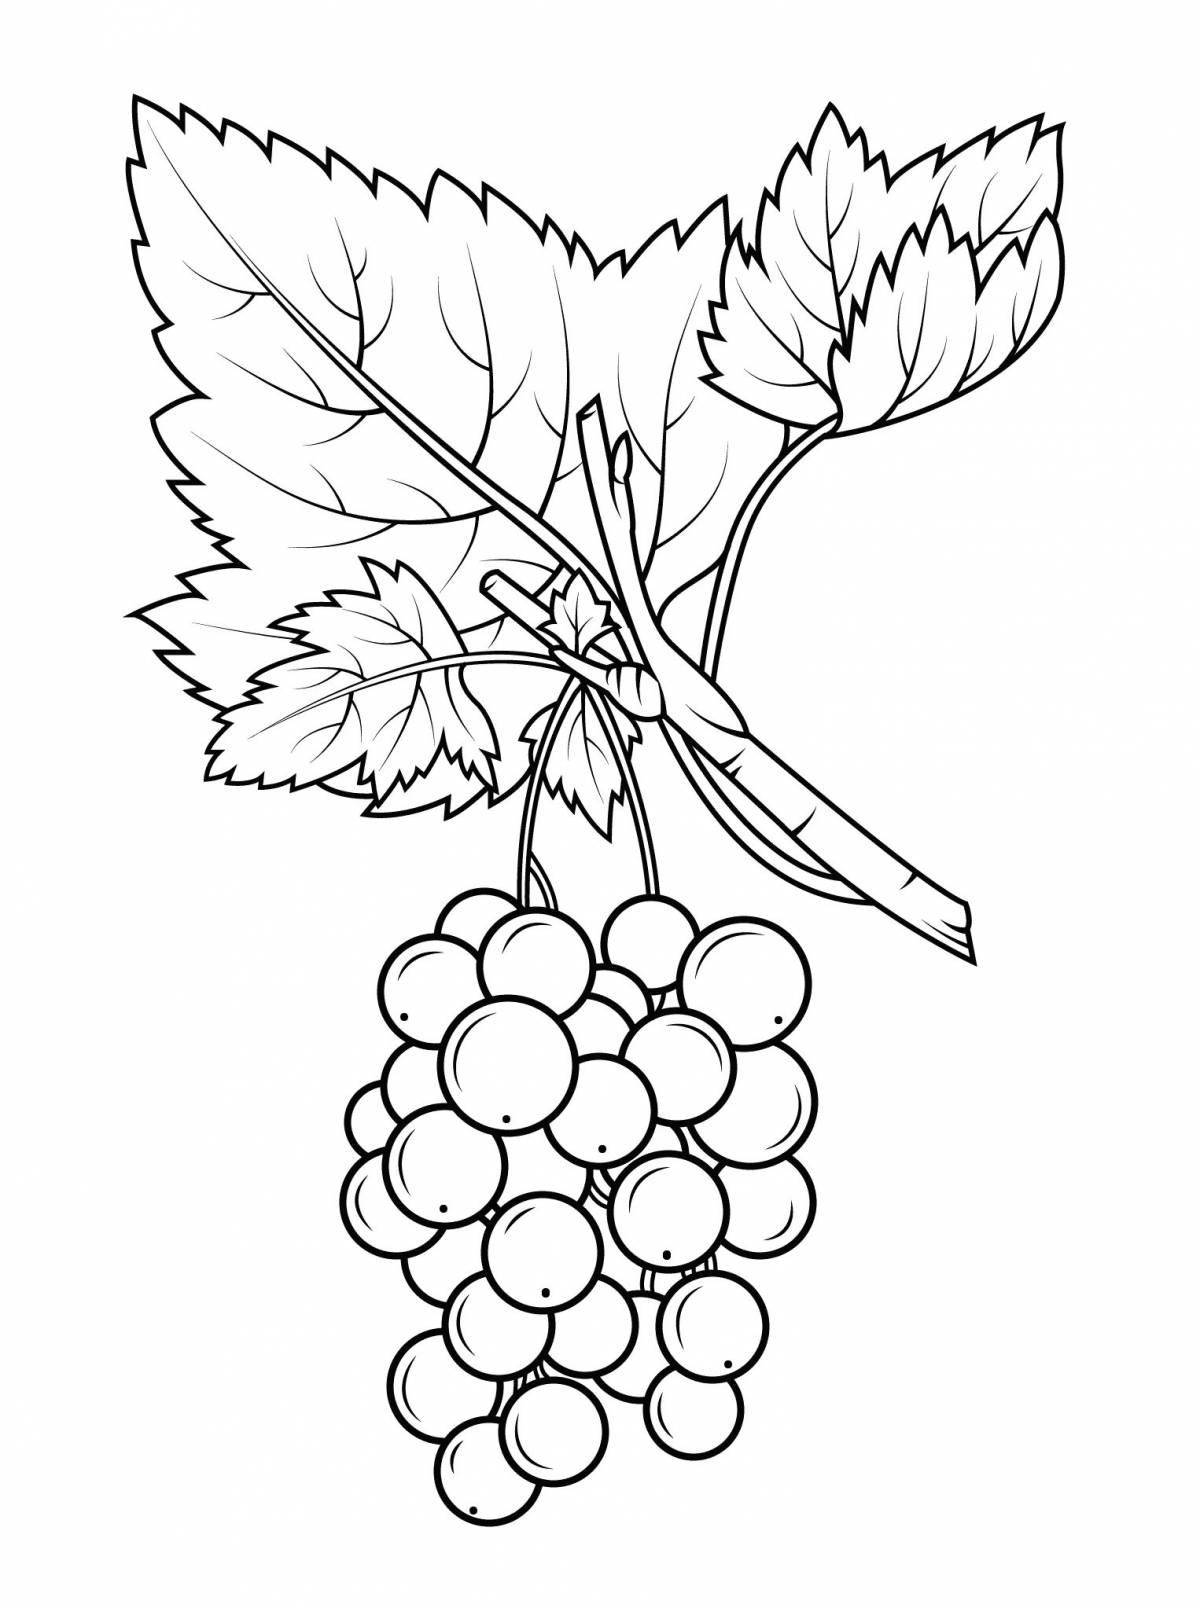 Blissful currant coloring book for preschoolers